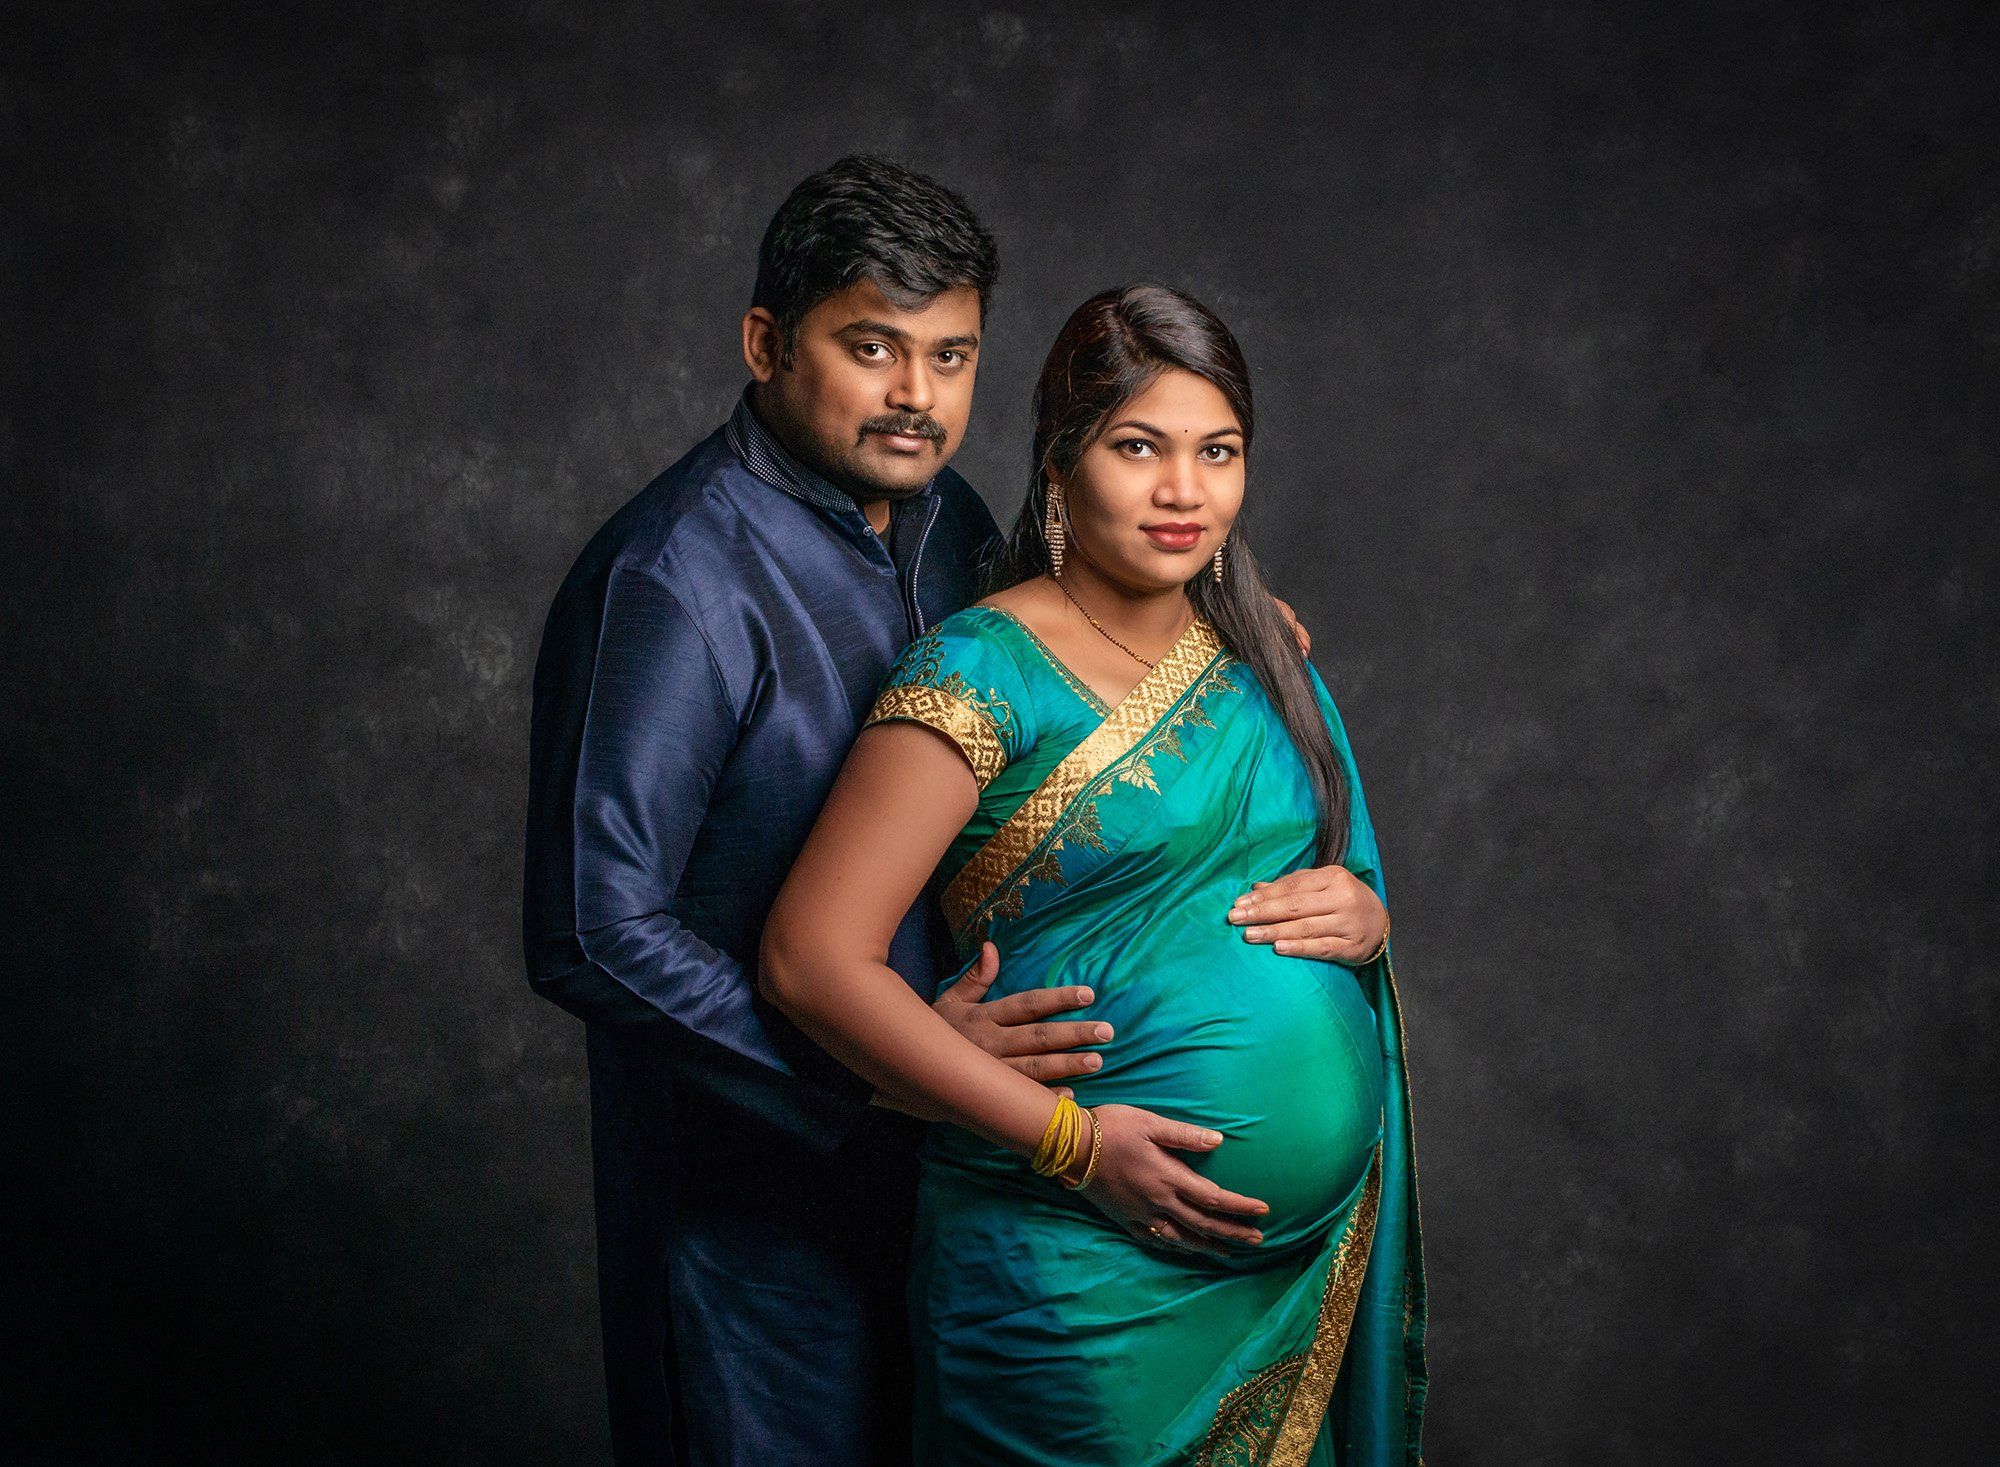 pregnant woman posing with husband in Indian dress clothing on gray backdrop